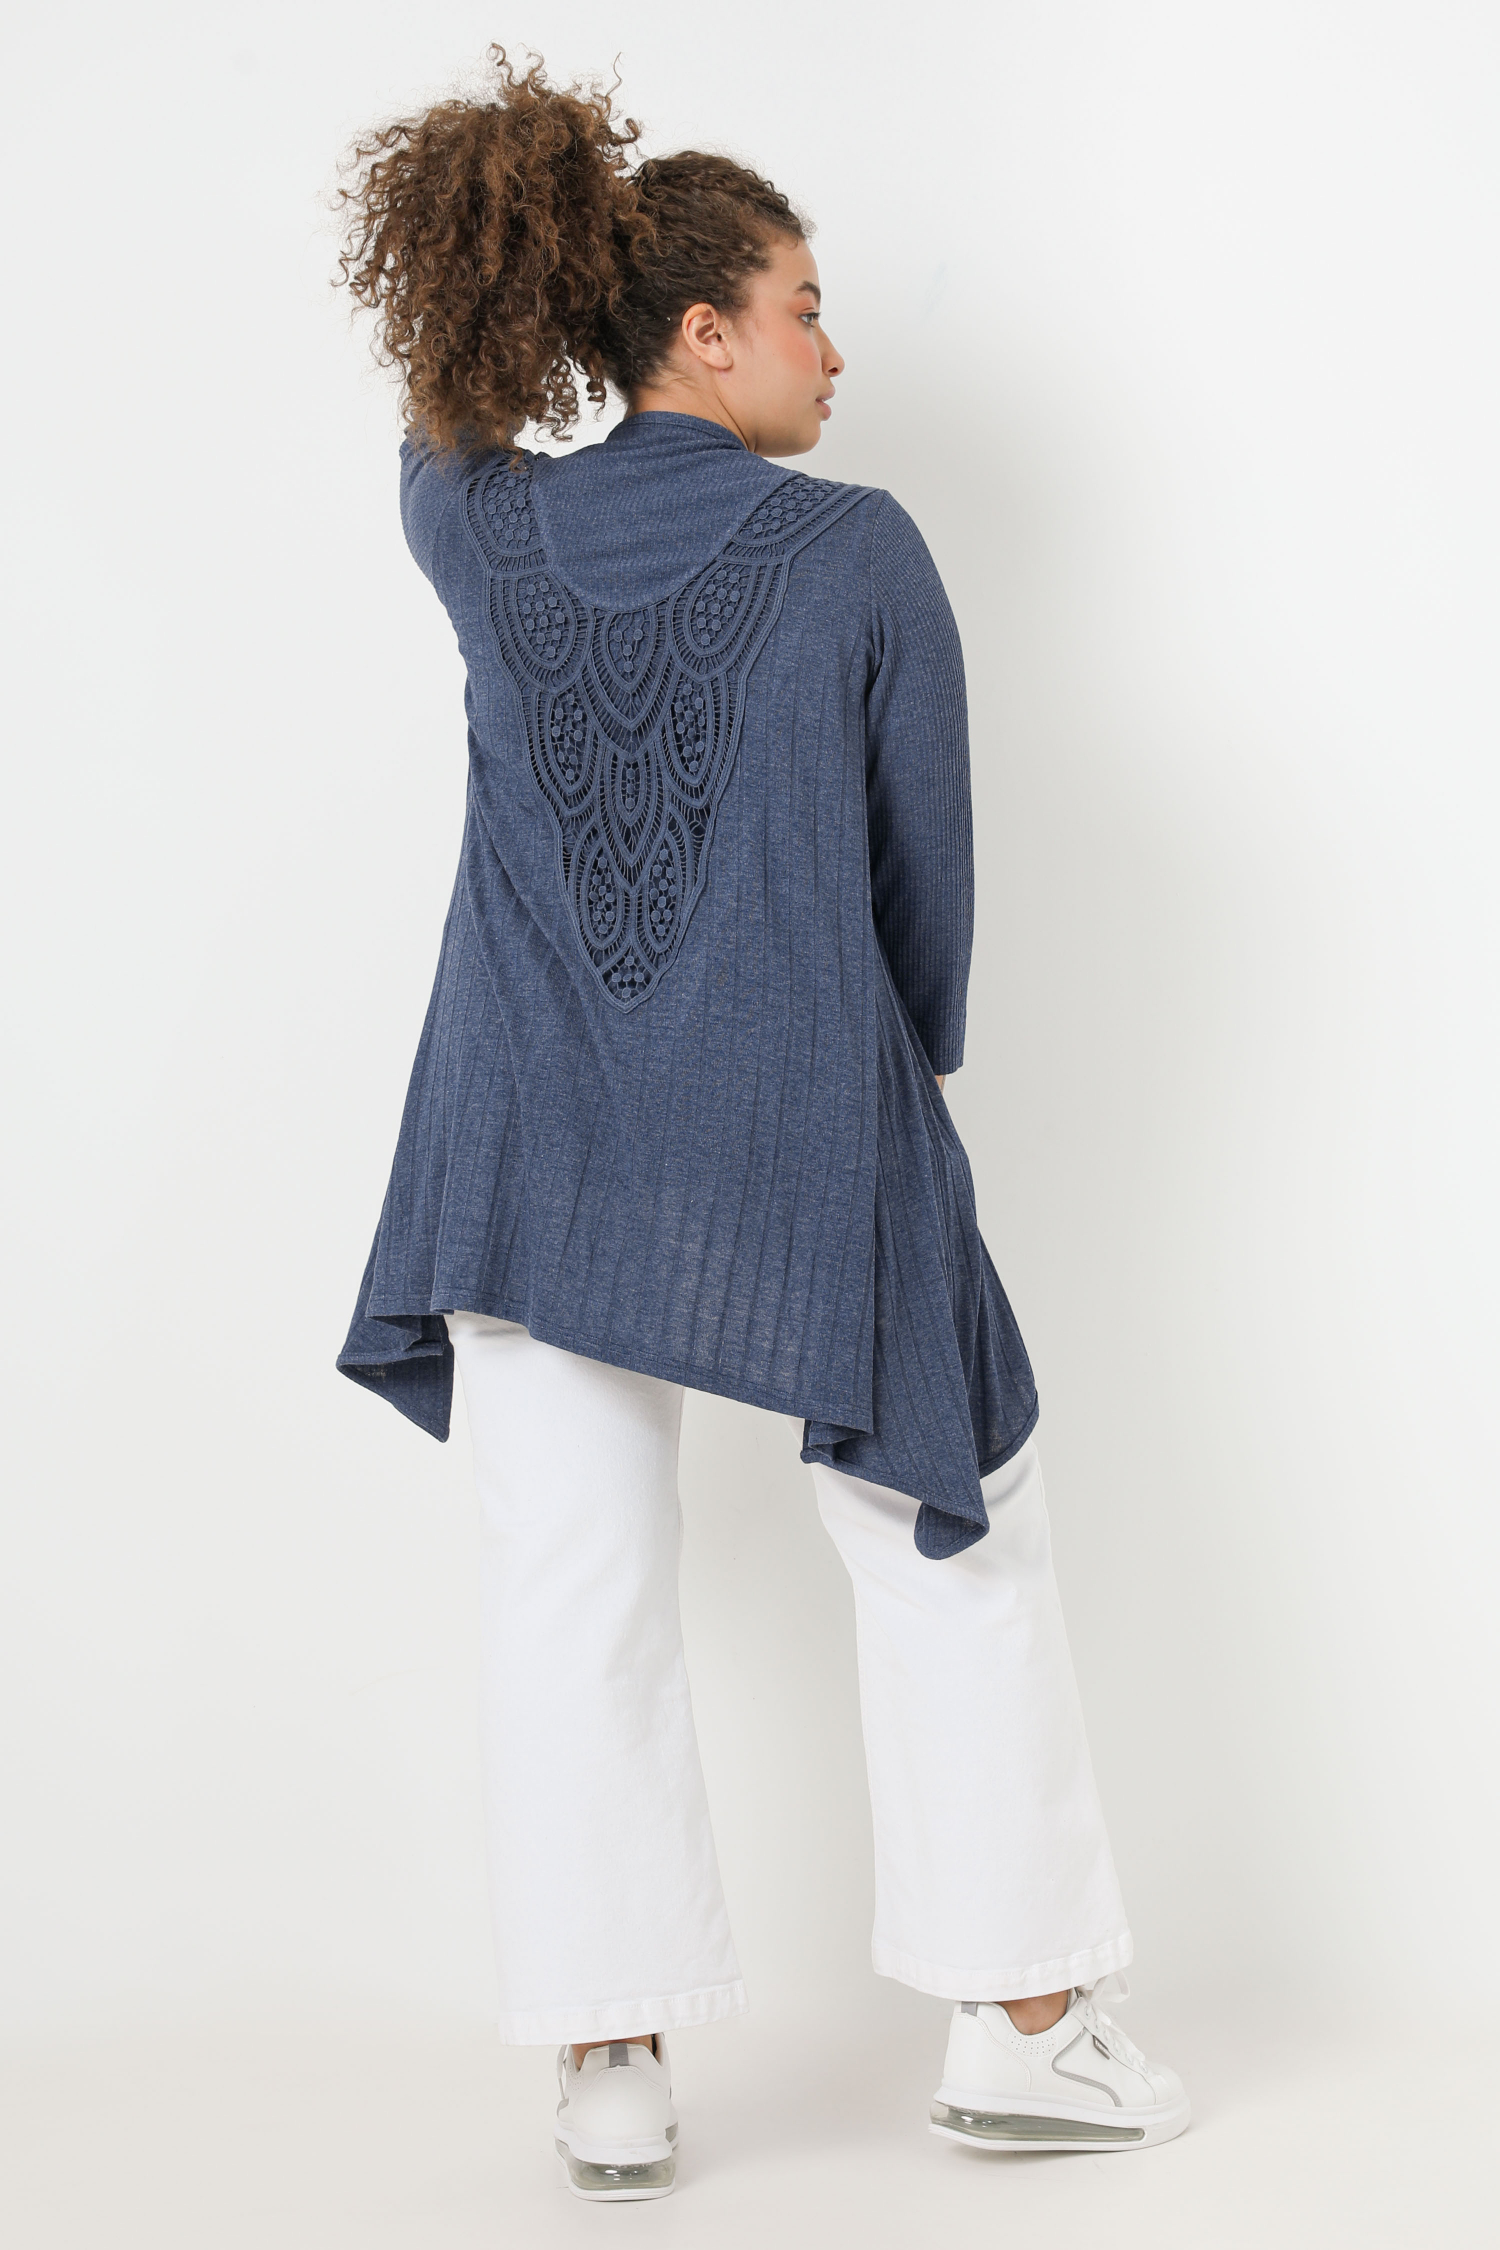 Ribbed knit vest and top set (shipping January 20/25)